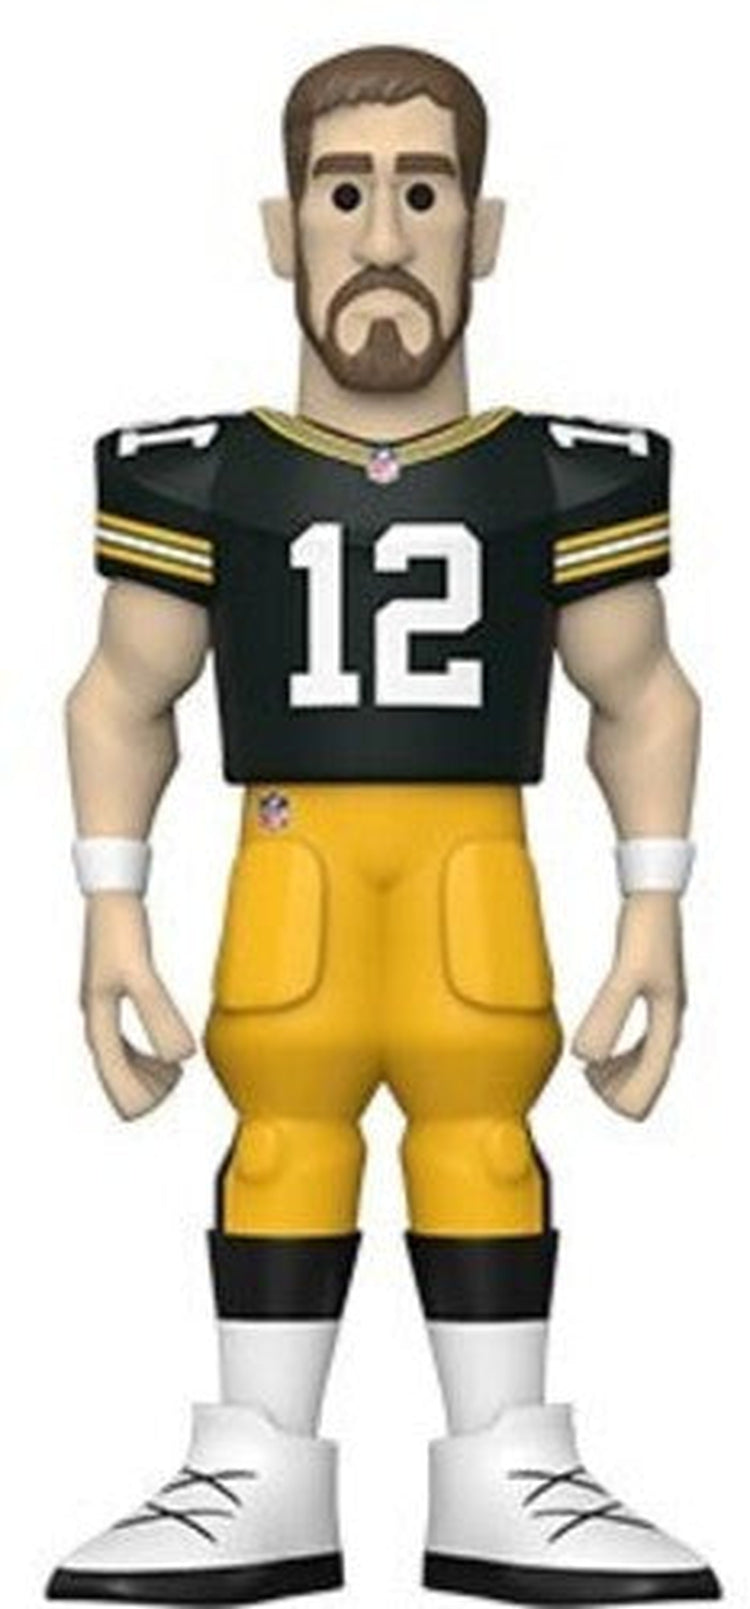 FUNKO GOLD 5 NFL: Packers - Aaron Rodgers (Home Uniform)(Styles May Vary)